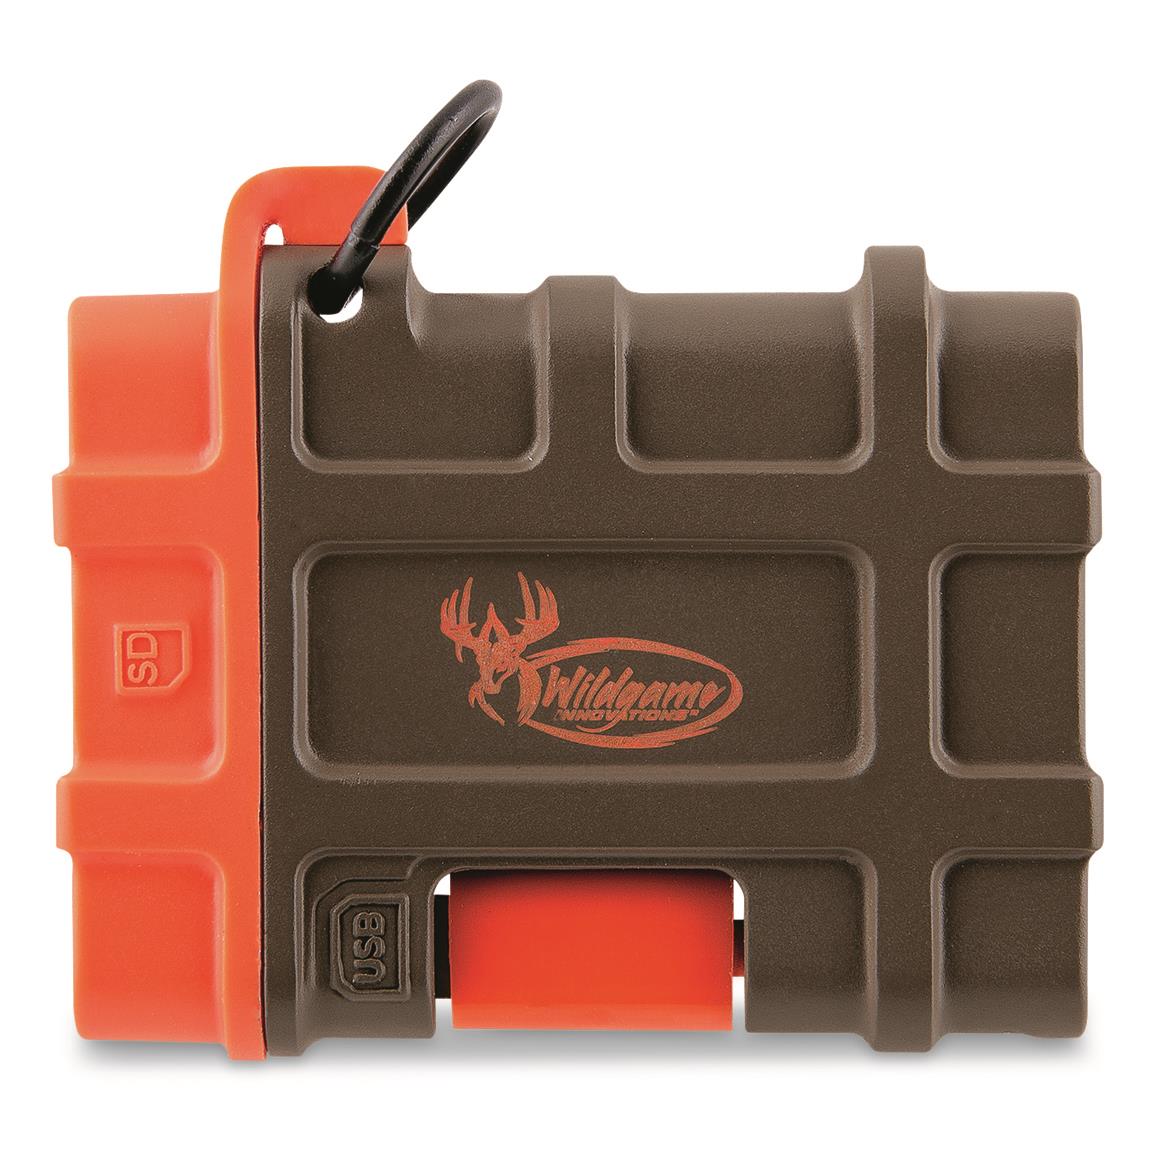 Wildgame Innovations iPhone SD Card Reader